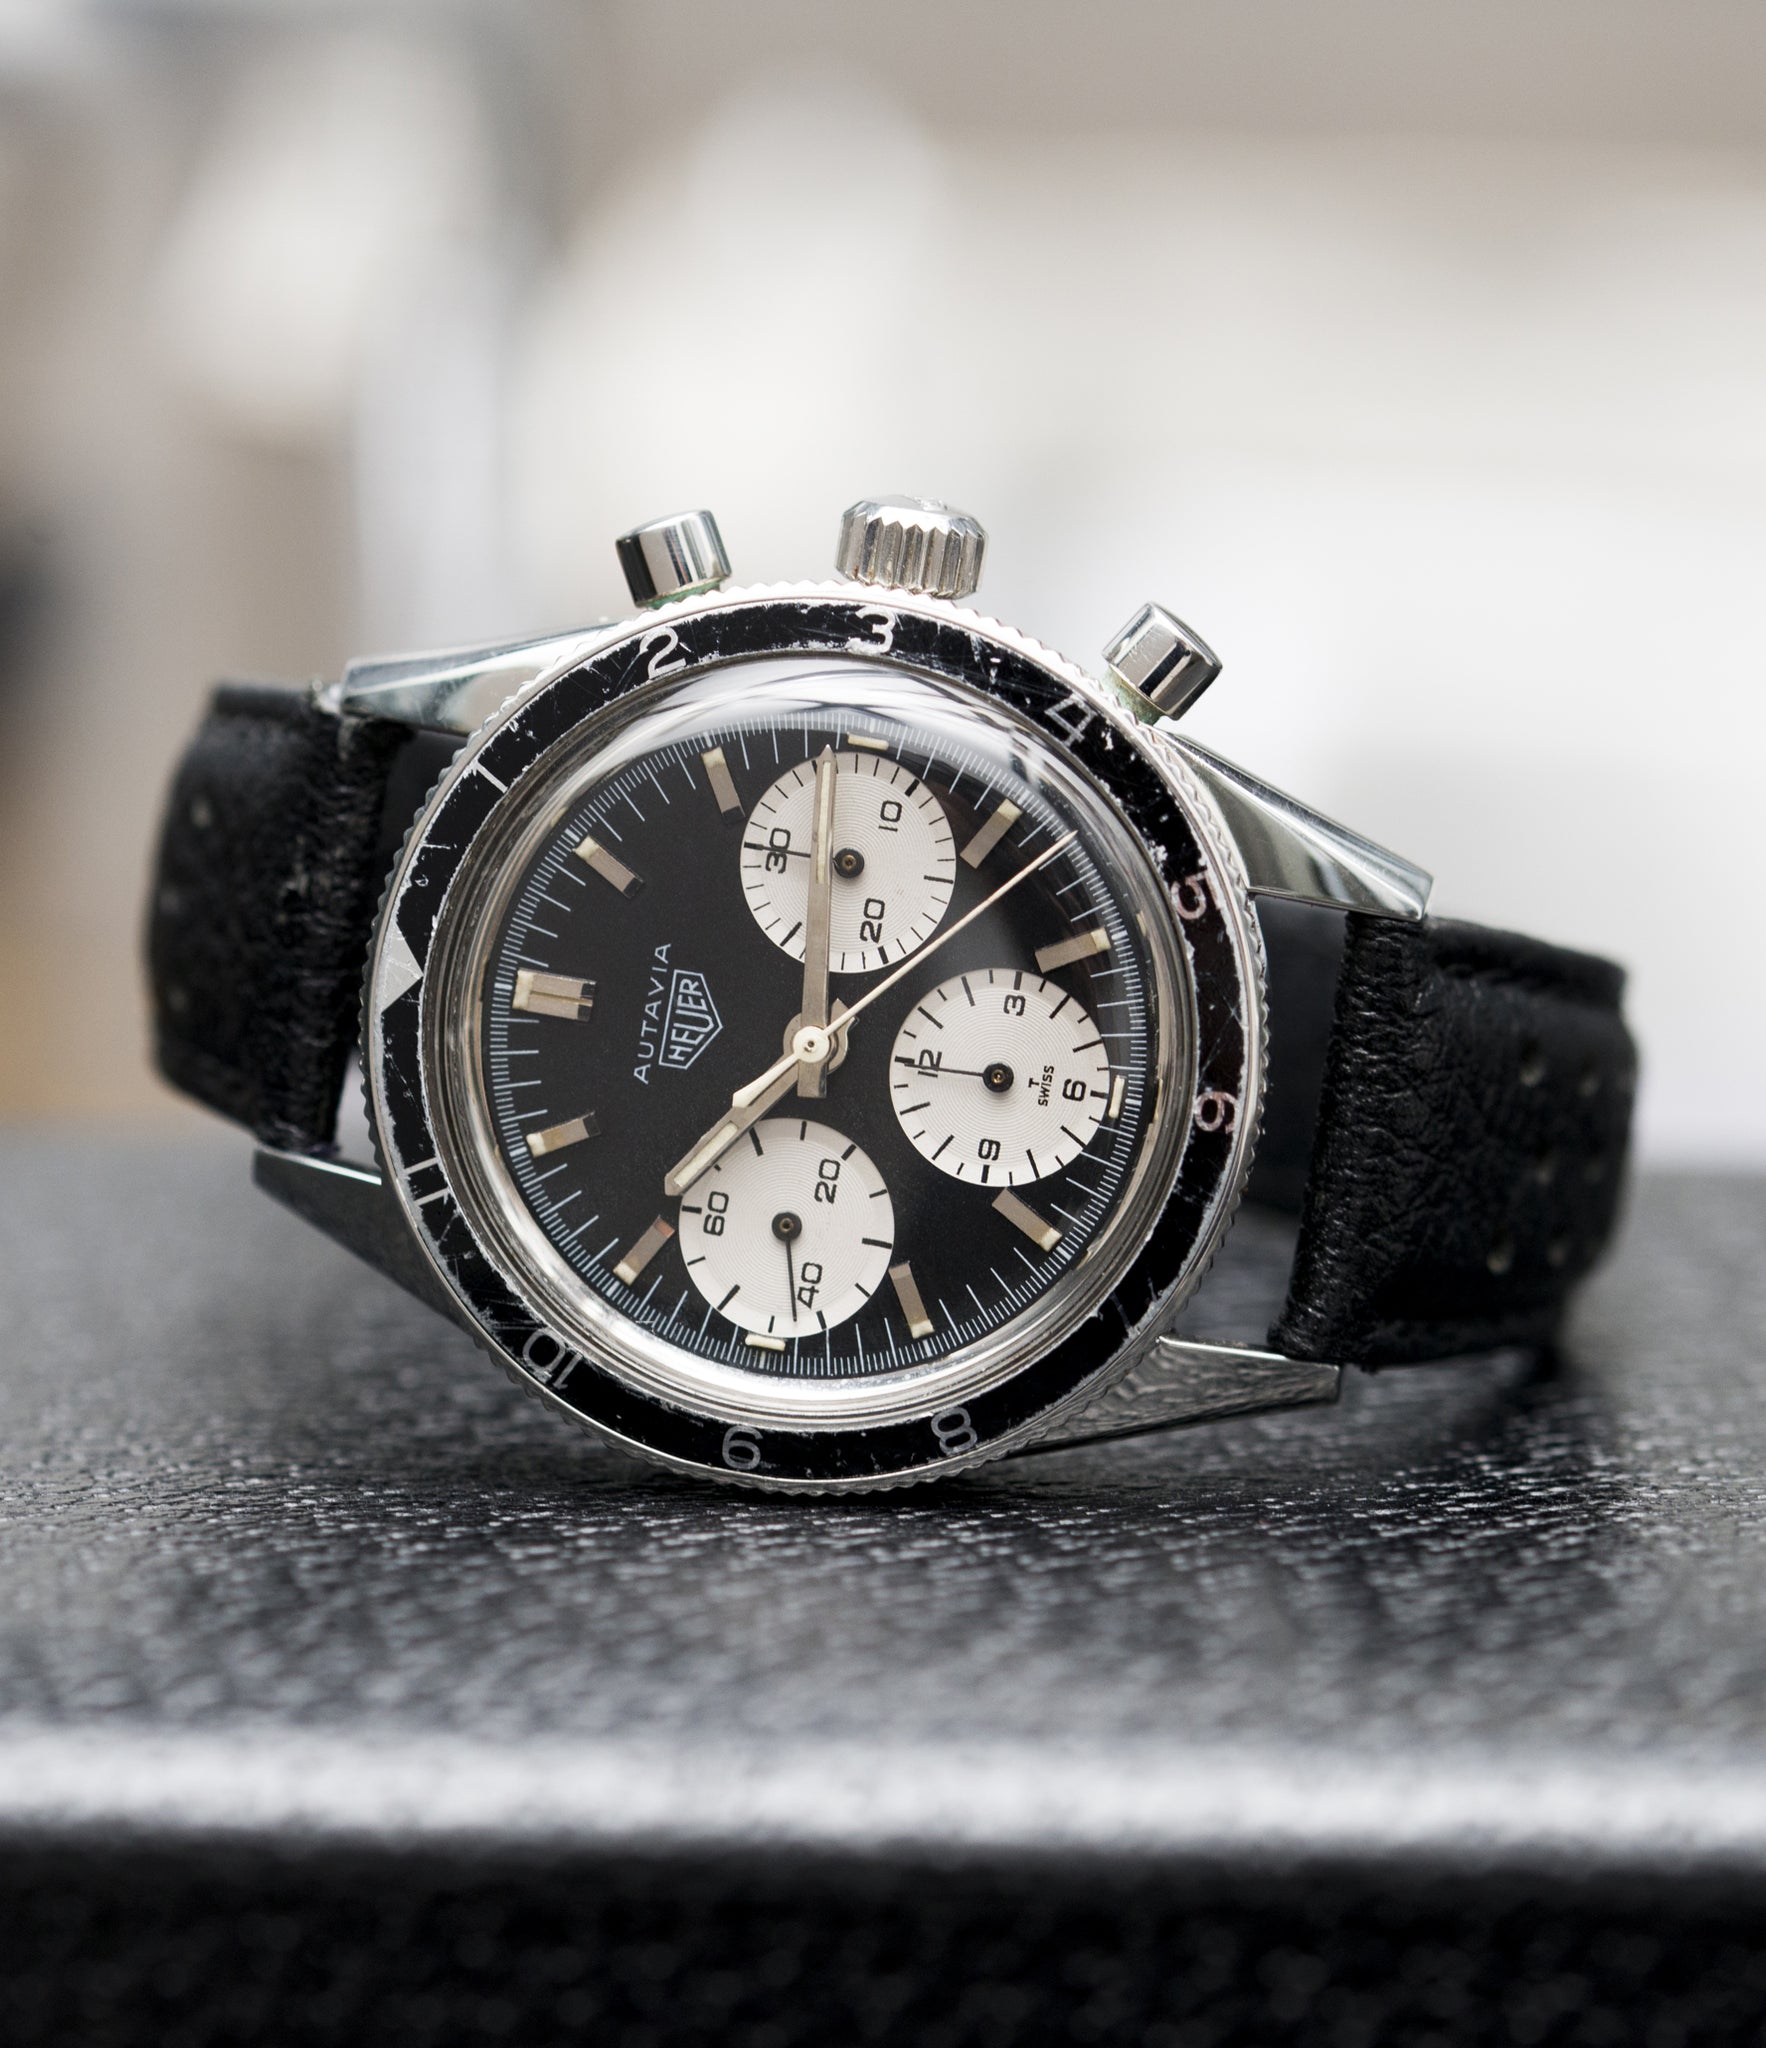 selling Heuer Autavia Rindt 2446 Valjoux 72 manual-winding steel sport chronograph watch for sale online at A Collected Man London UK vintage rare watch specialist